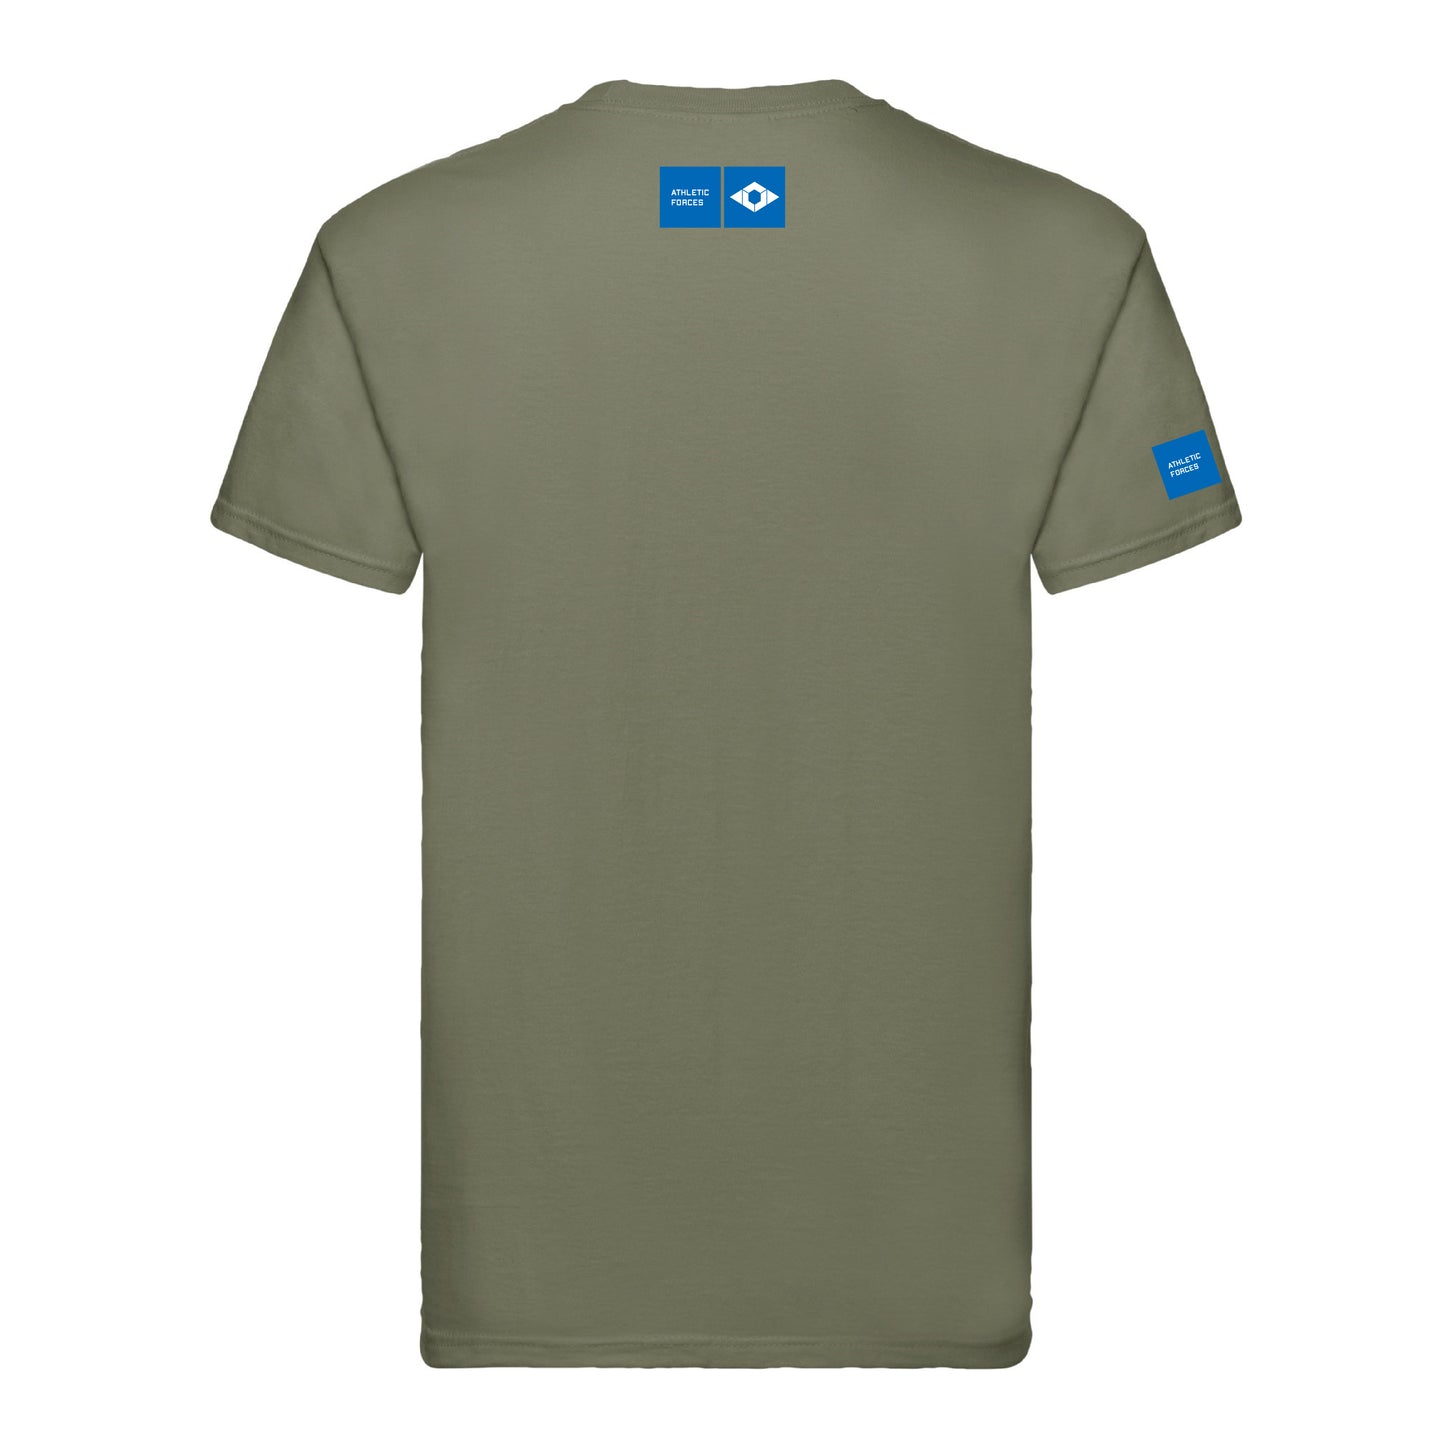 Union of Forces® T-Shirt